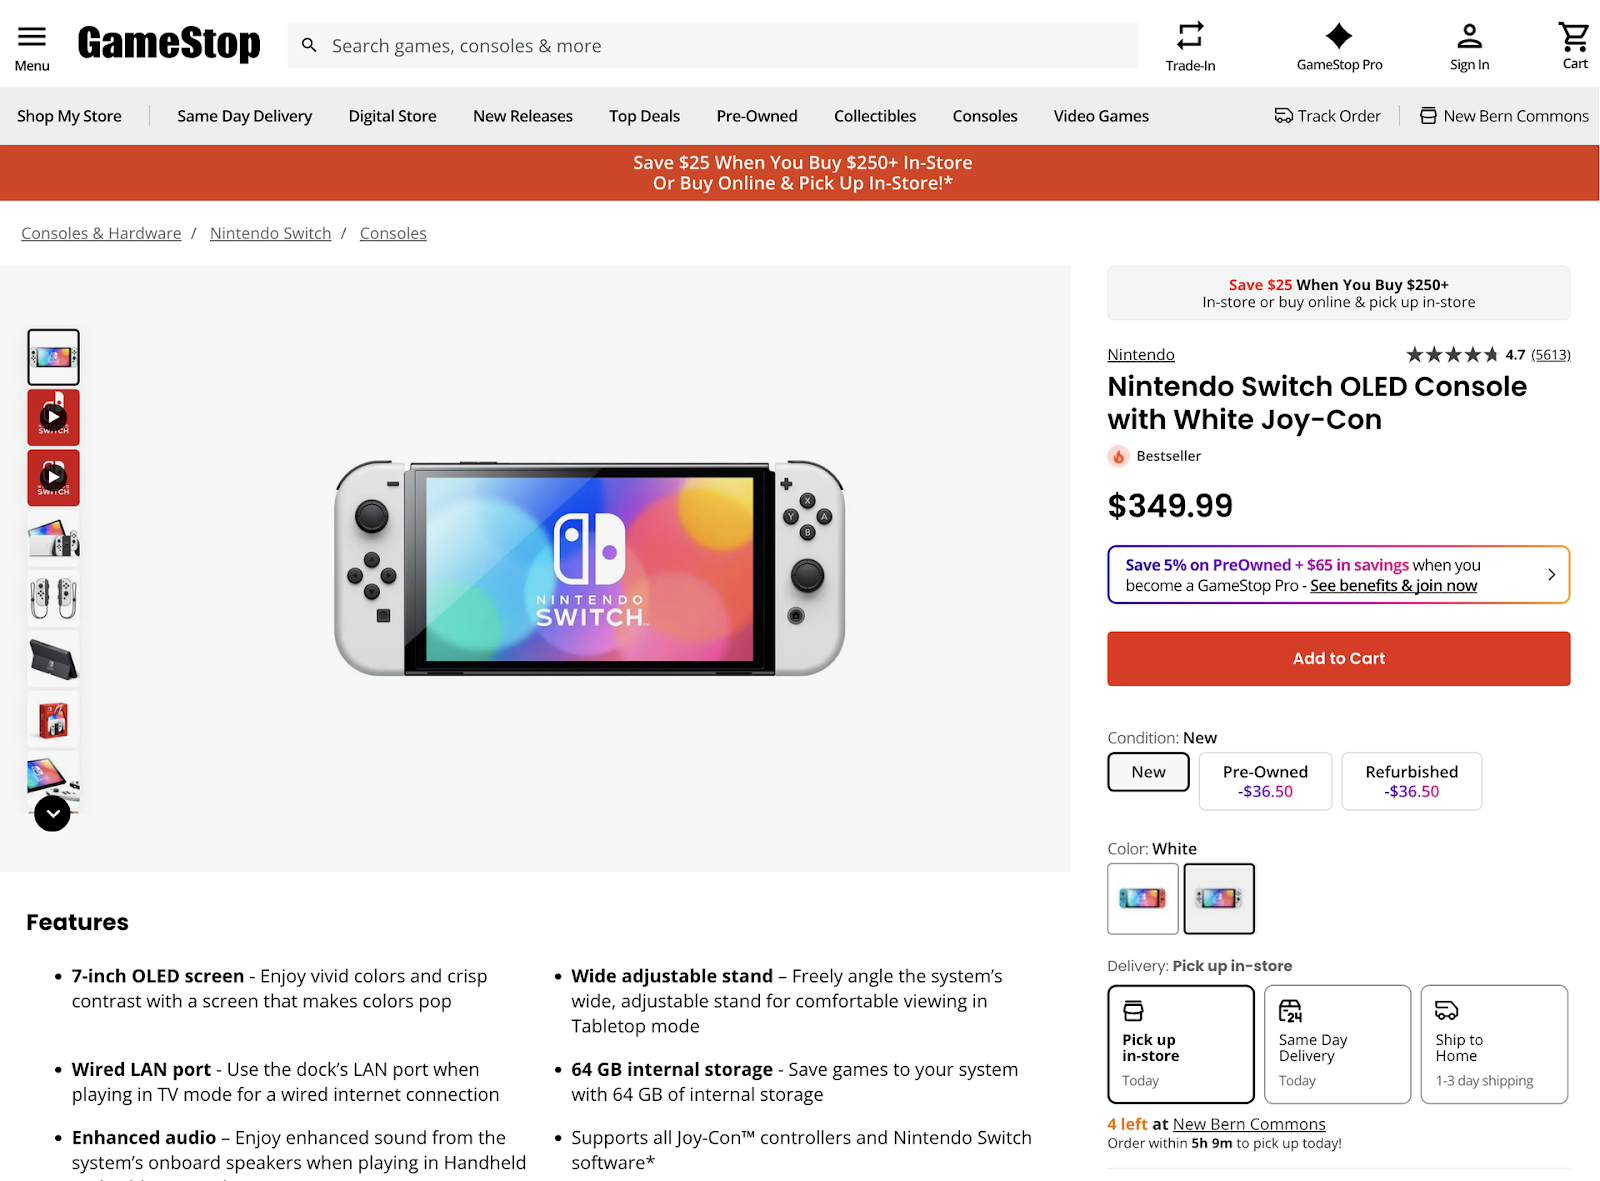 nintendo switch product page with pickup in-store option and quantity on the local level